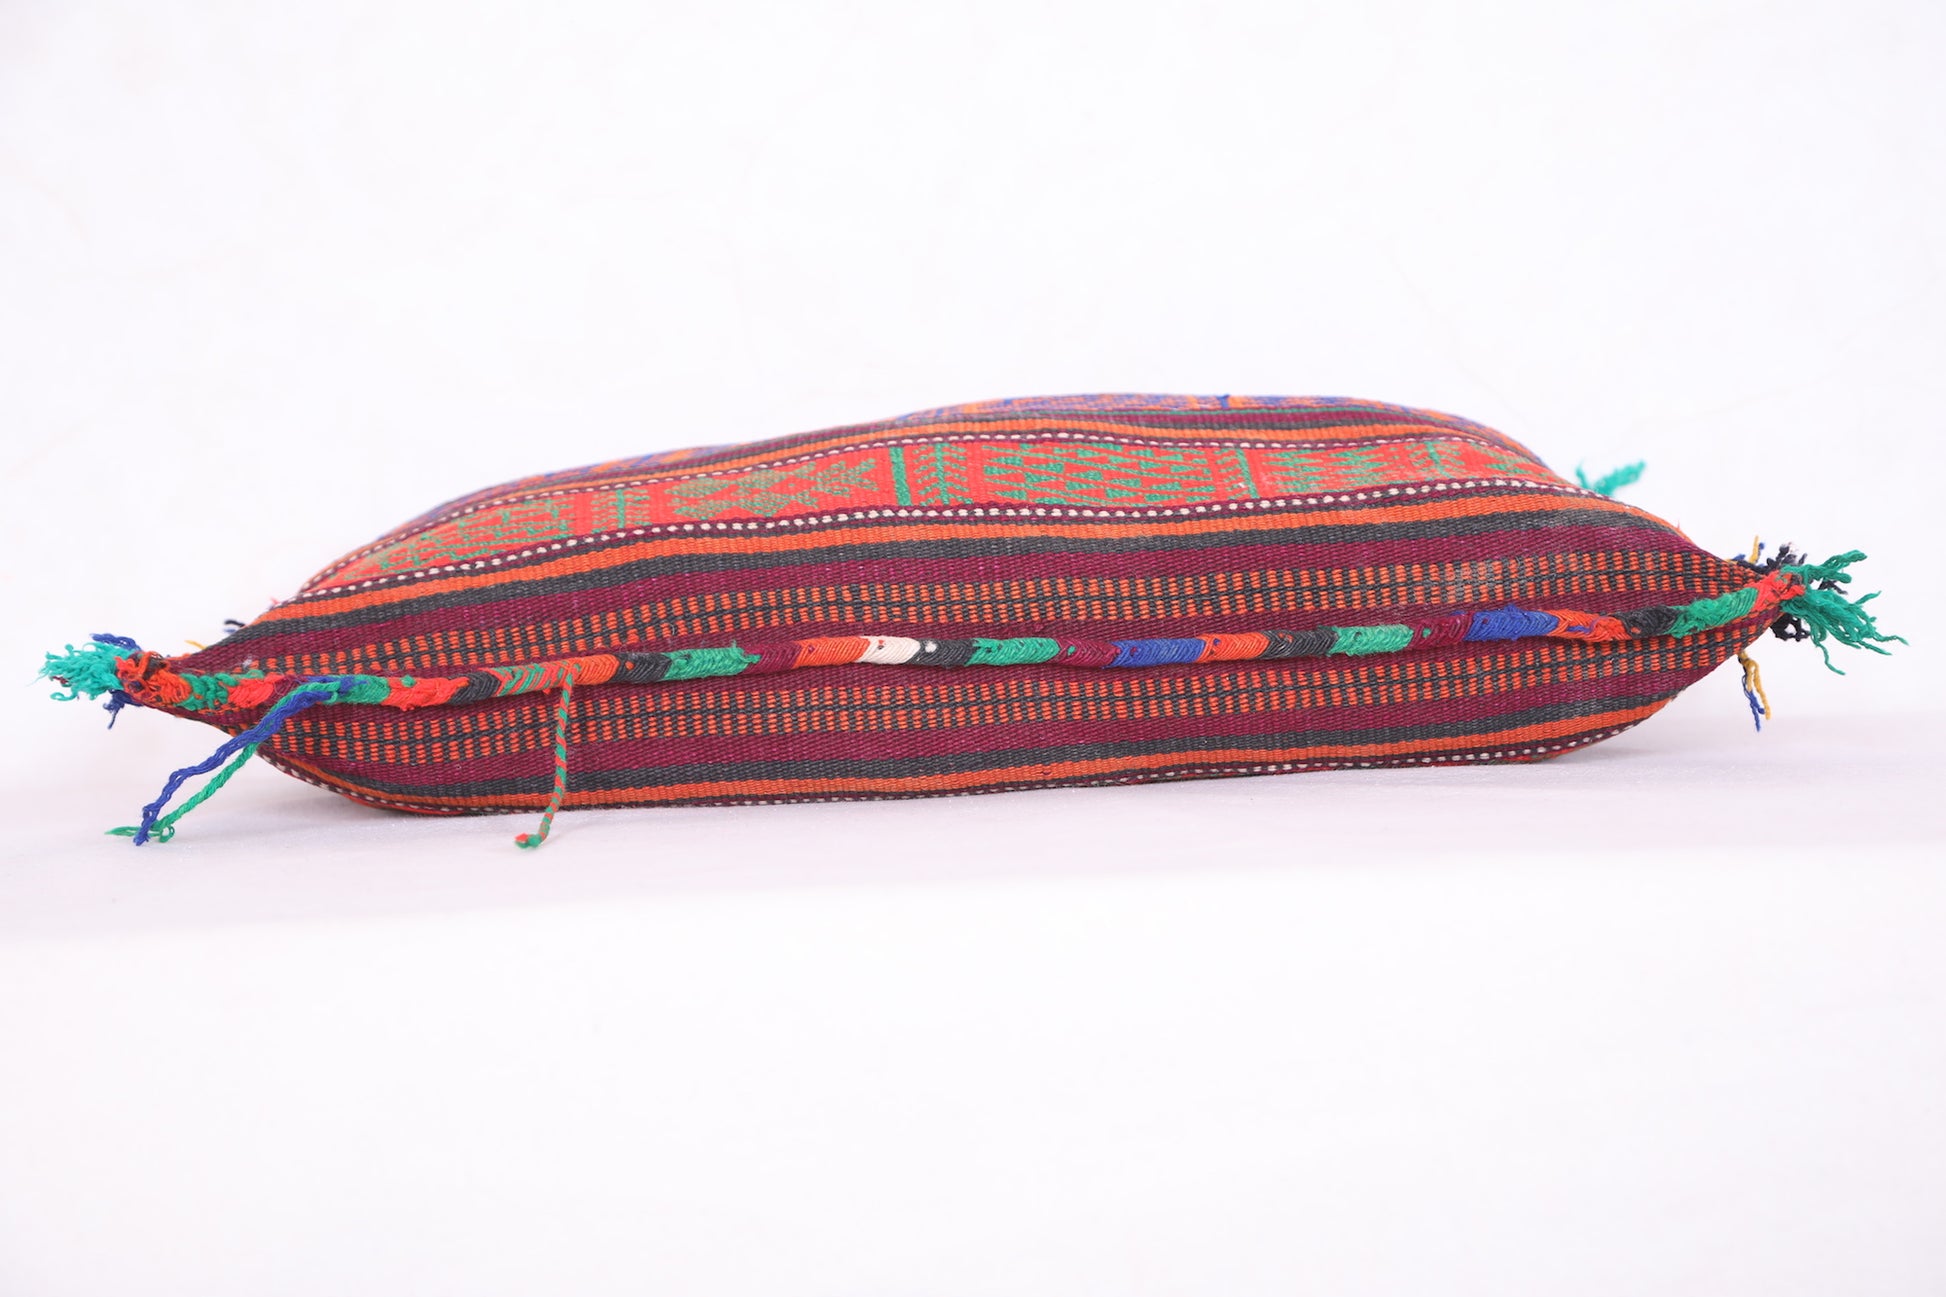 Moroccan pillow 15.3 INCHES X 20.2 INCHES